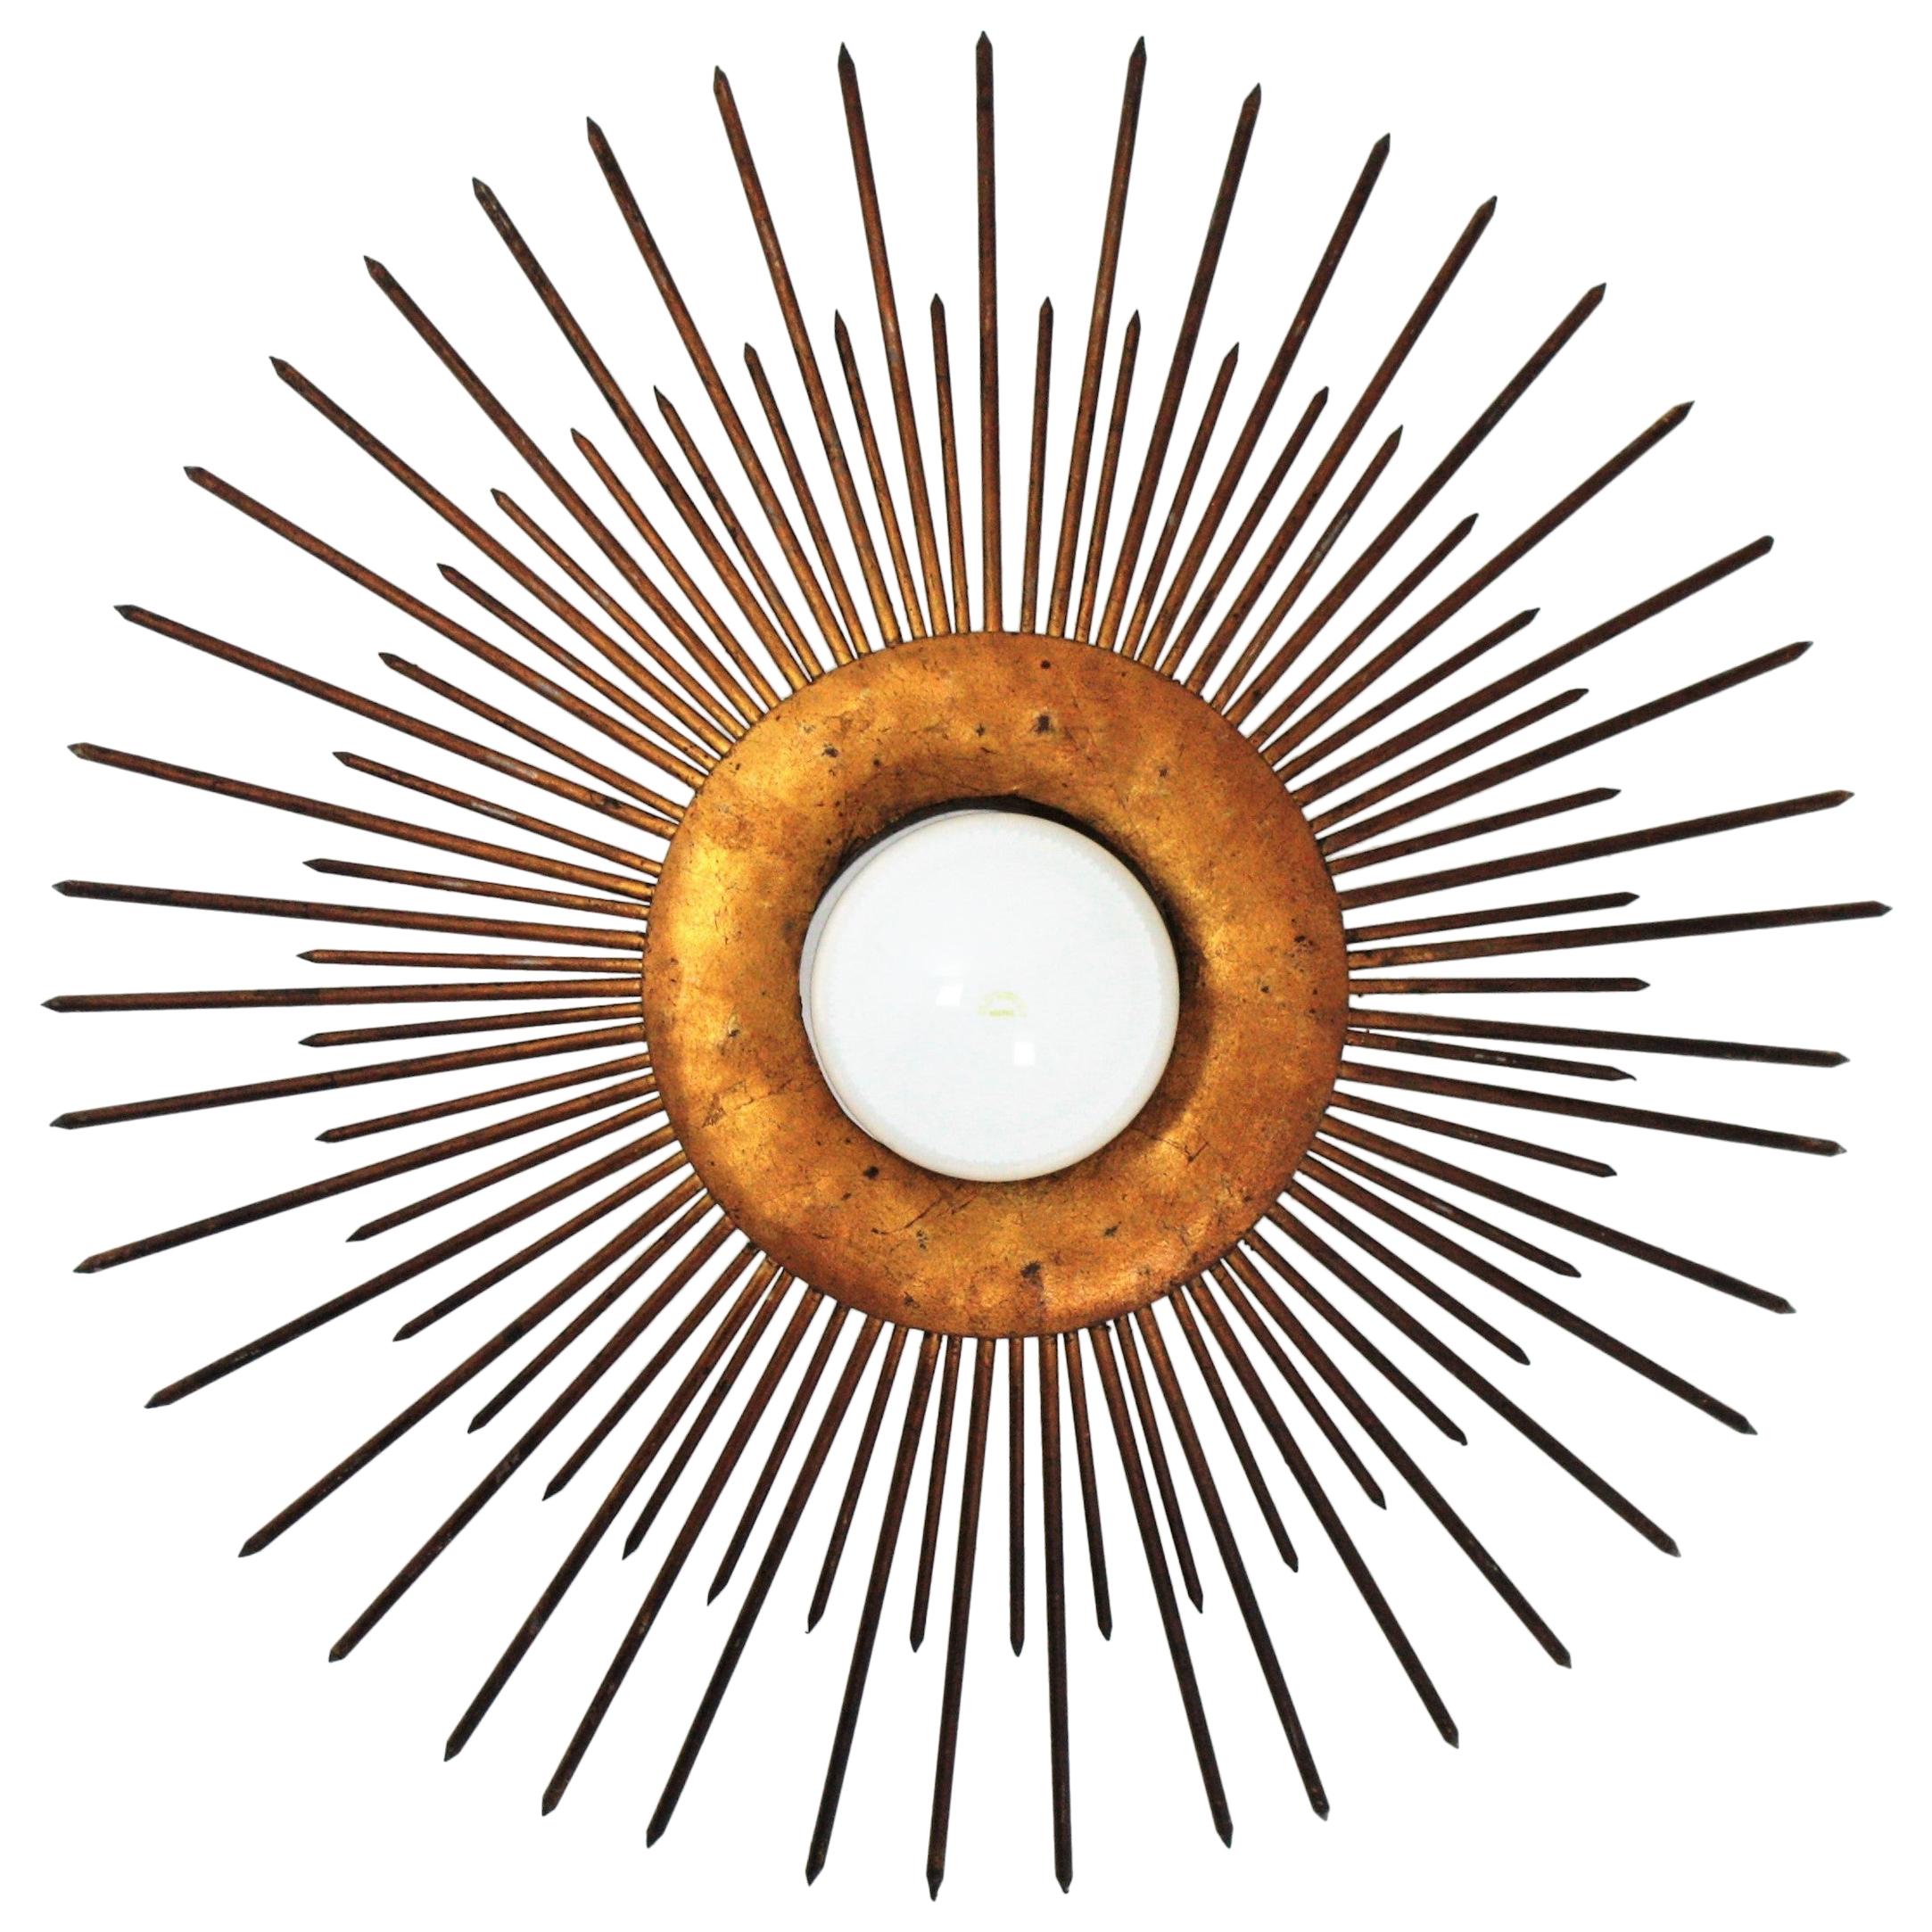 French wrought iron bronze gilt large sunburst flush mount or pendant, 1930s-1940s
A highly decorative sunburst shaped ceiling light fixture with frontal light. It has iron nails in two sizes as sun beams surrounding the central sphere and a design